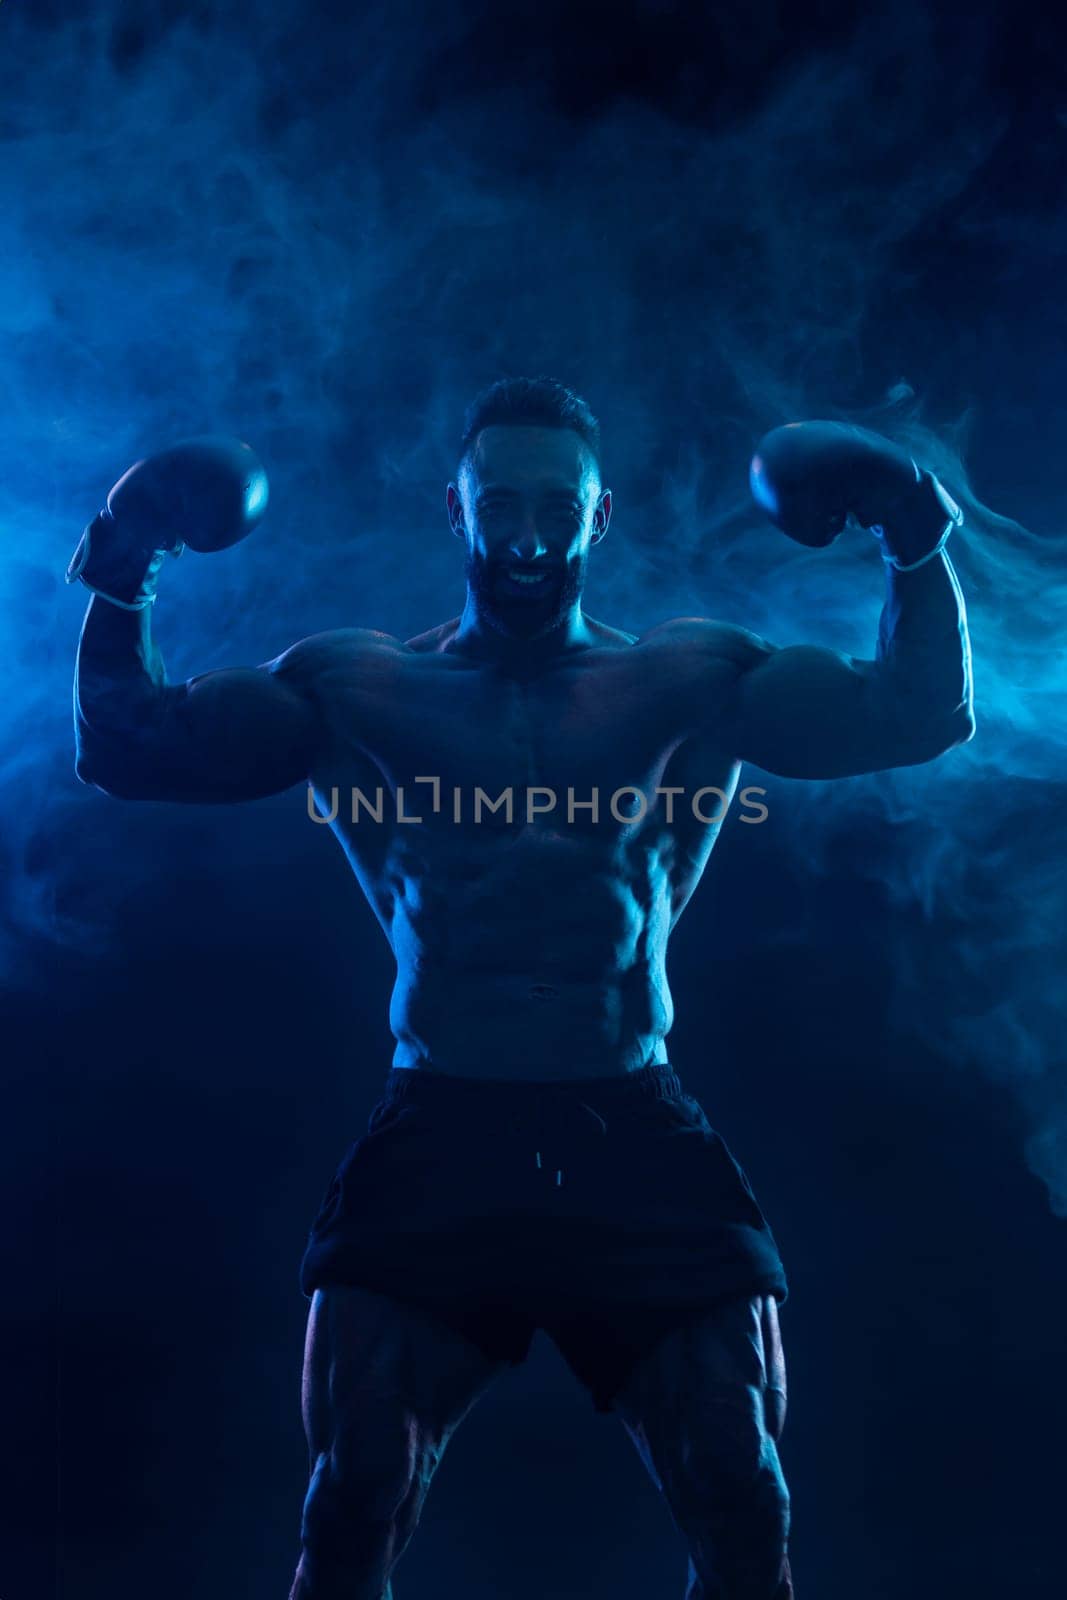 Man Athlete Boxer. Download high resolution photo for advertising online sports betting. Picture for ad a bookmaker's office